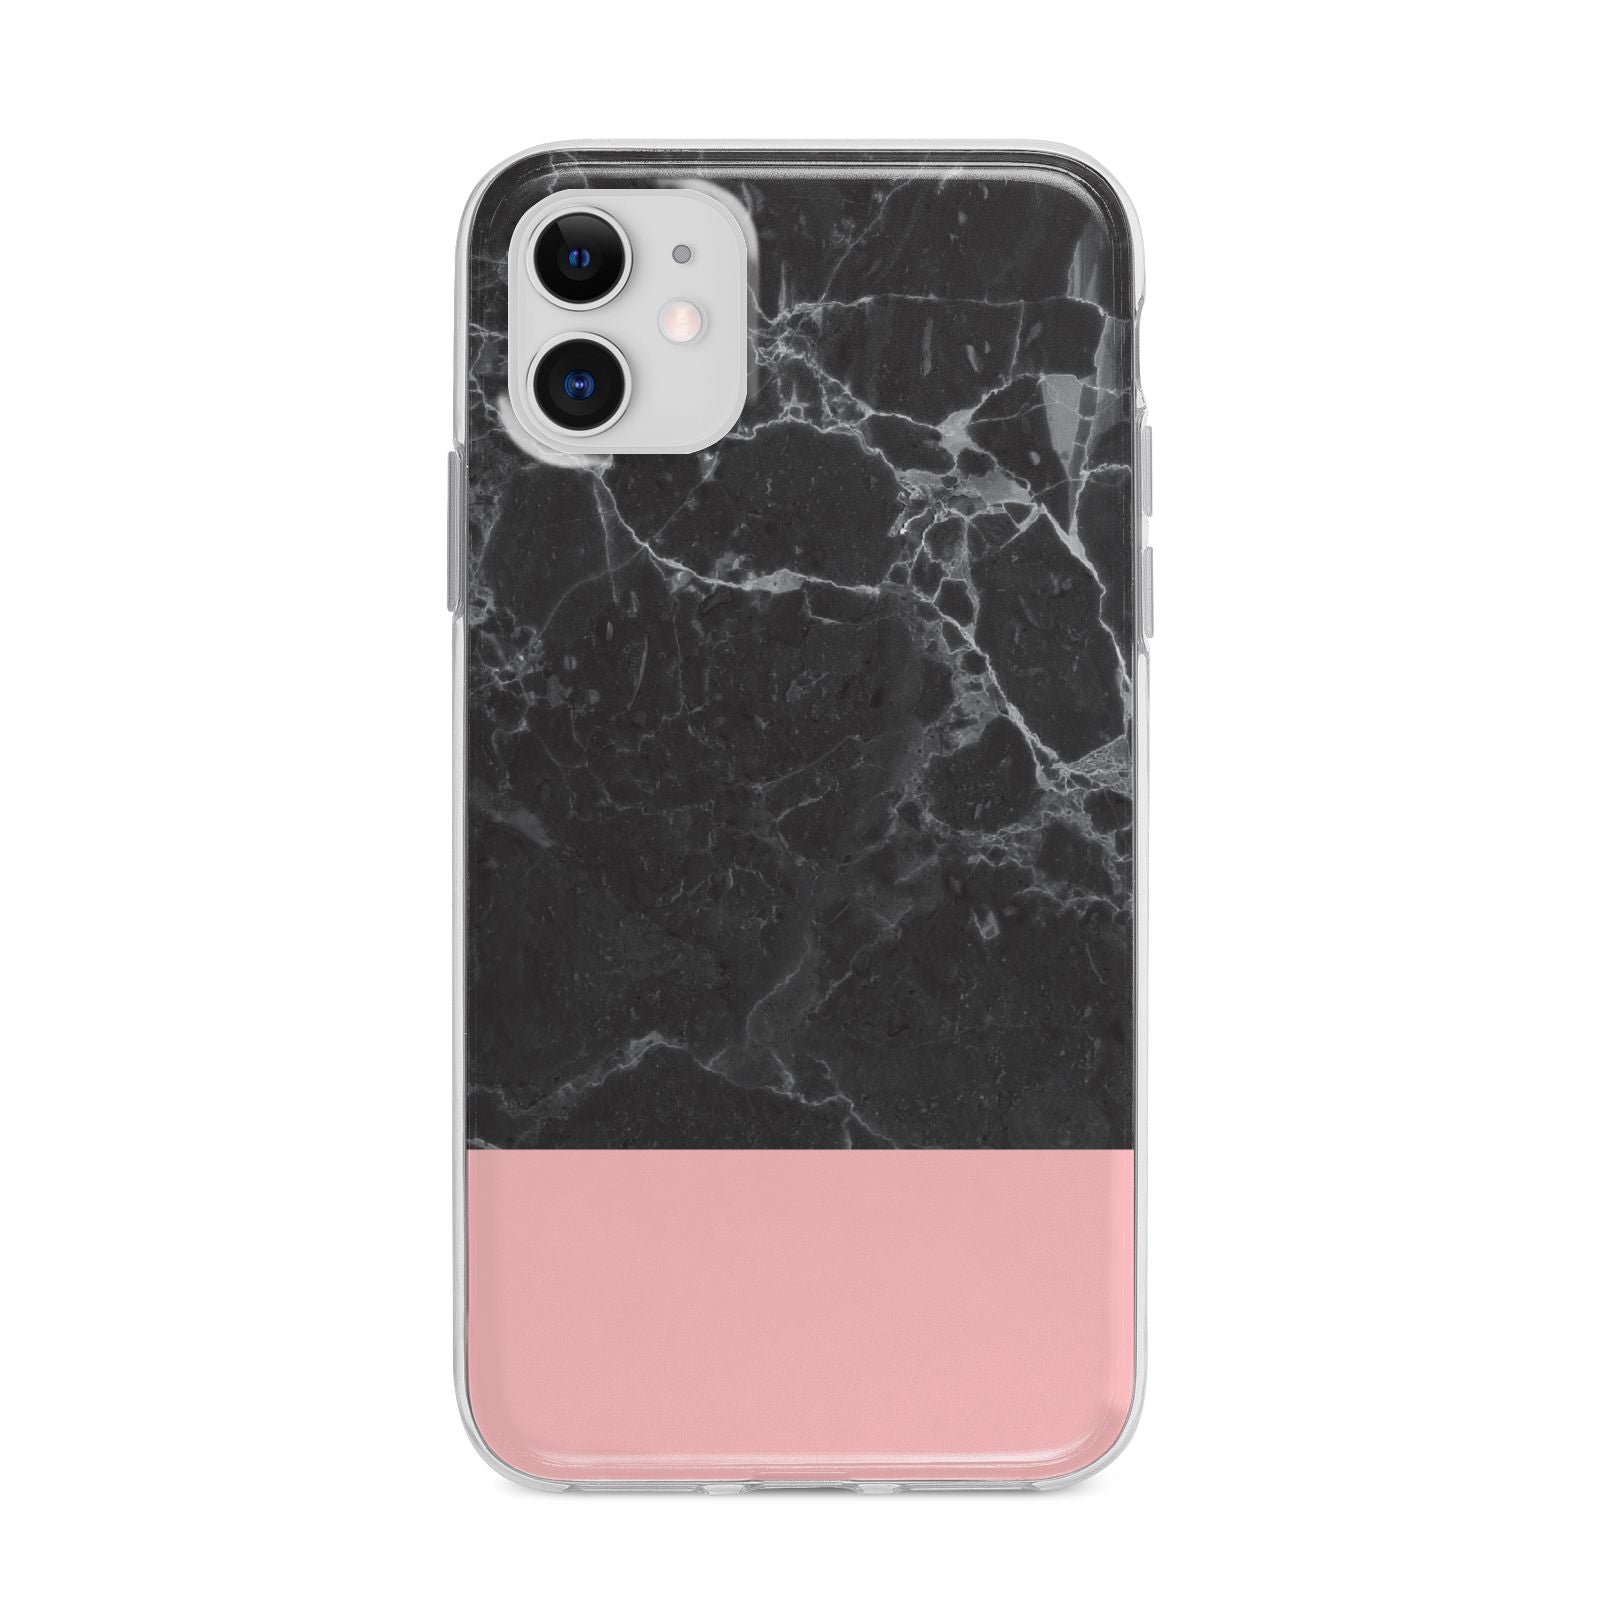 Marble Black Pink Apple iPhone 11 in White with Bumper Case